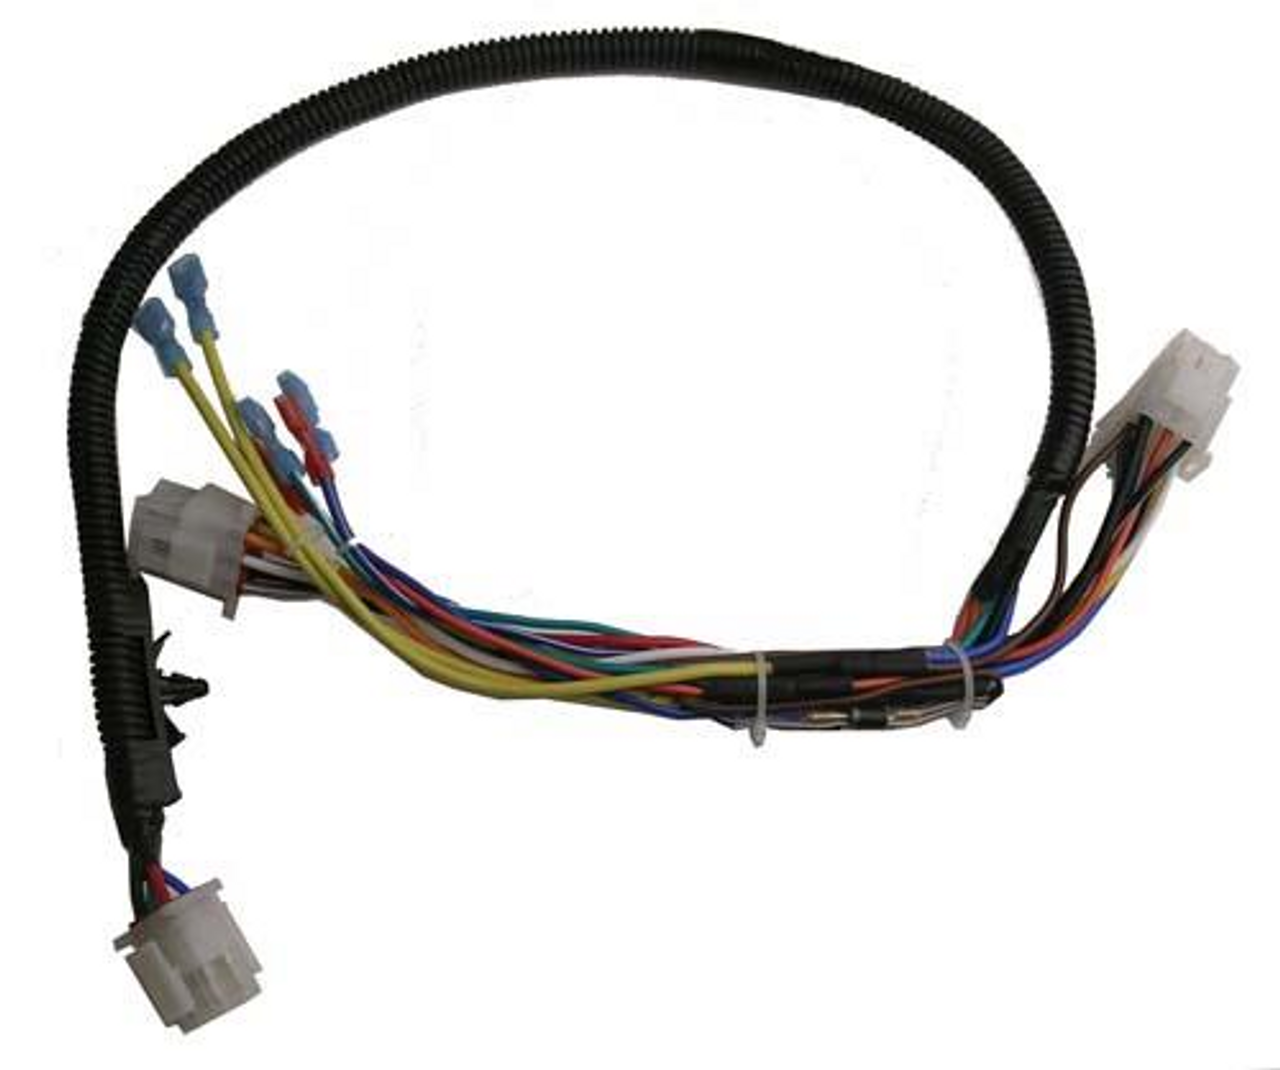 Club Car Precedent Electric Lighting Harness (Years 2004-Up), 6186, 1025278-01